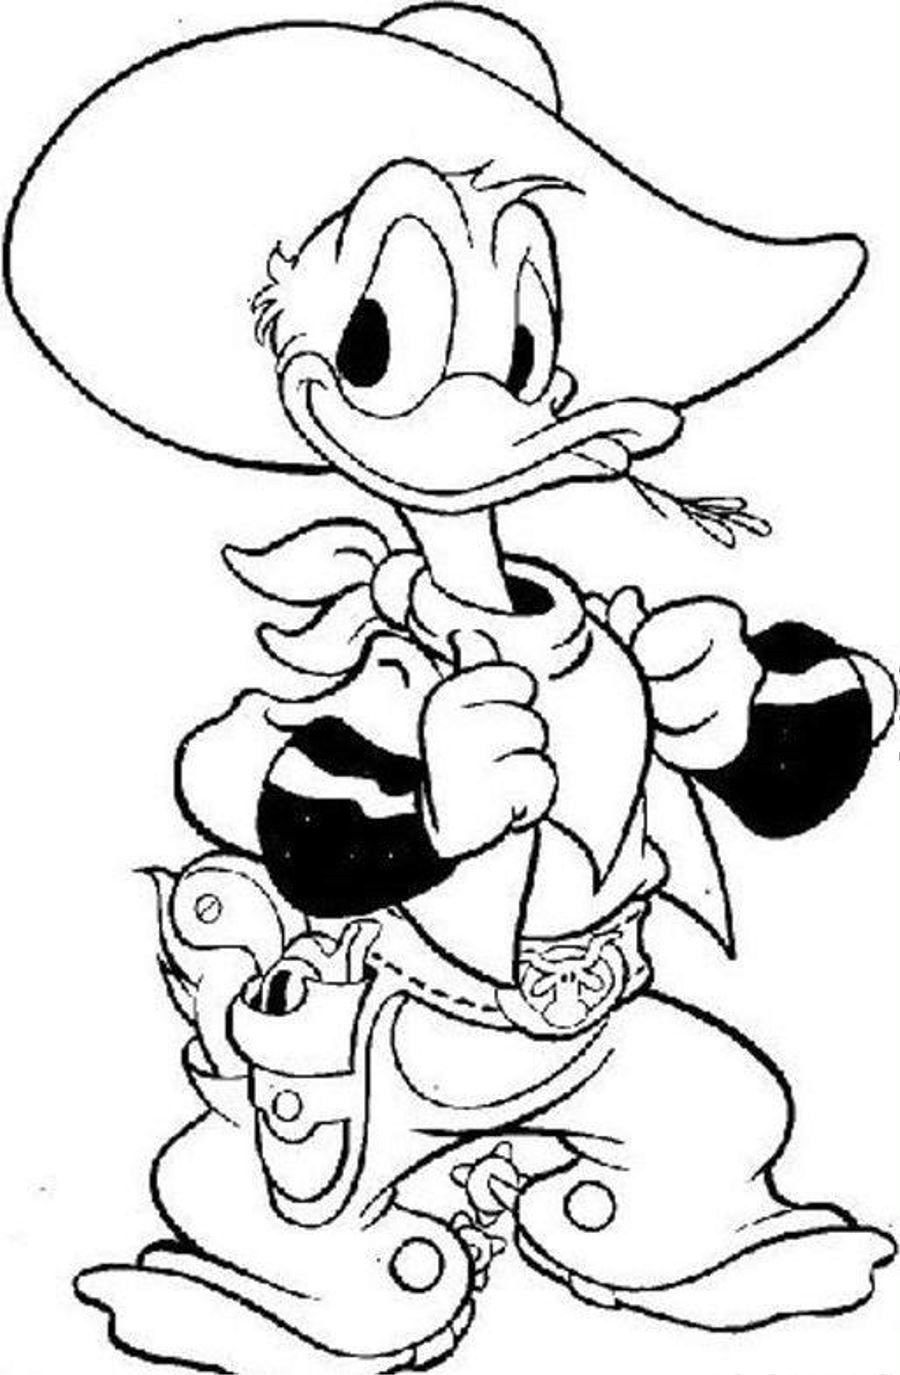 western coloring pages western coloring pages to download and print for free pages coloring western 